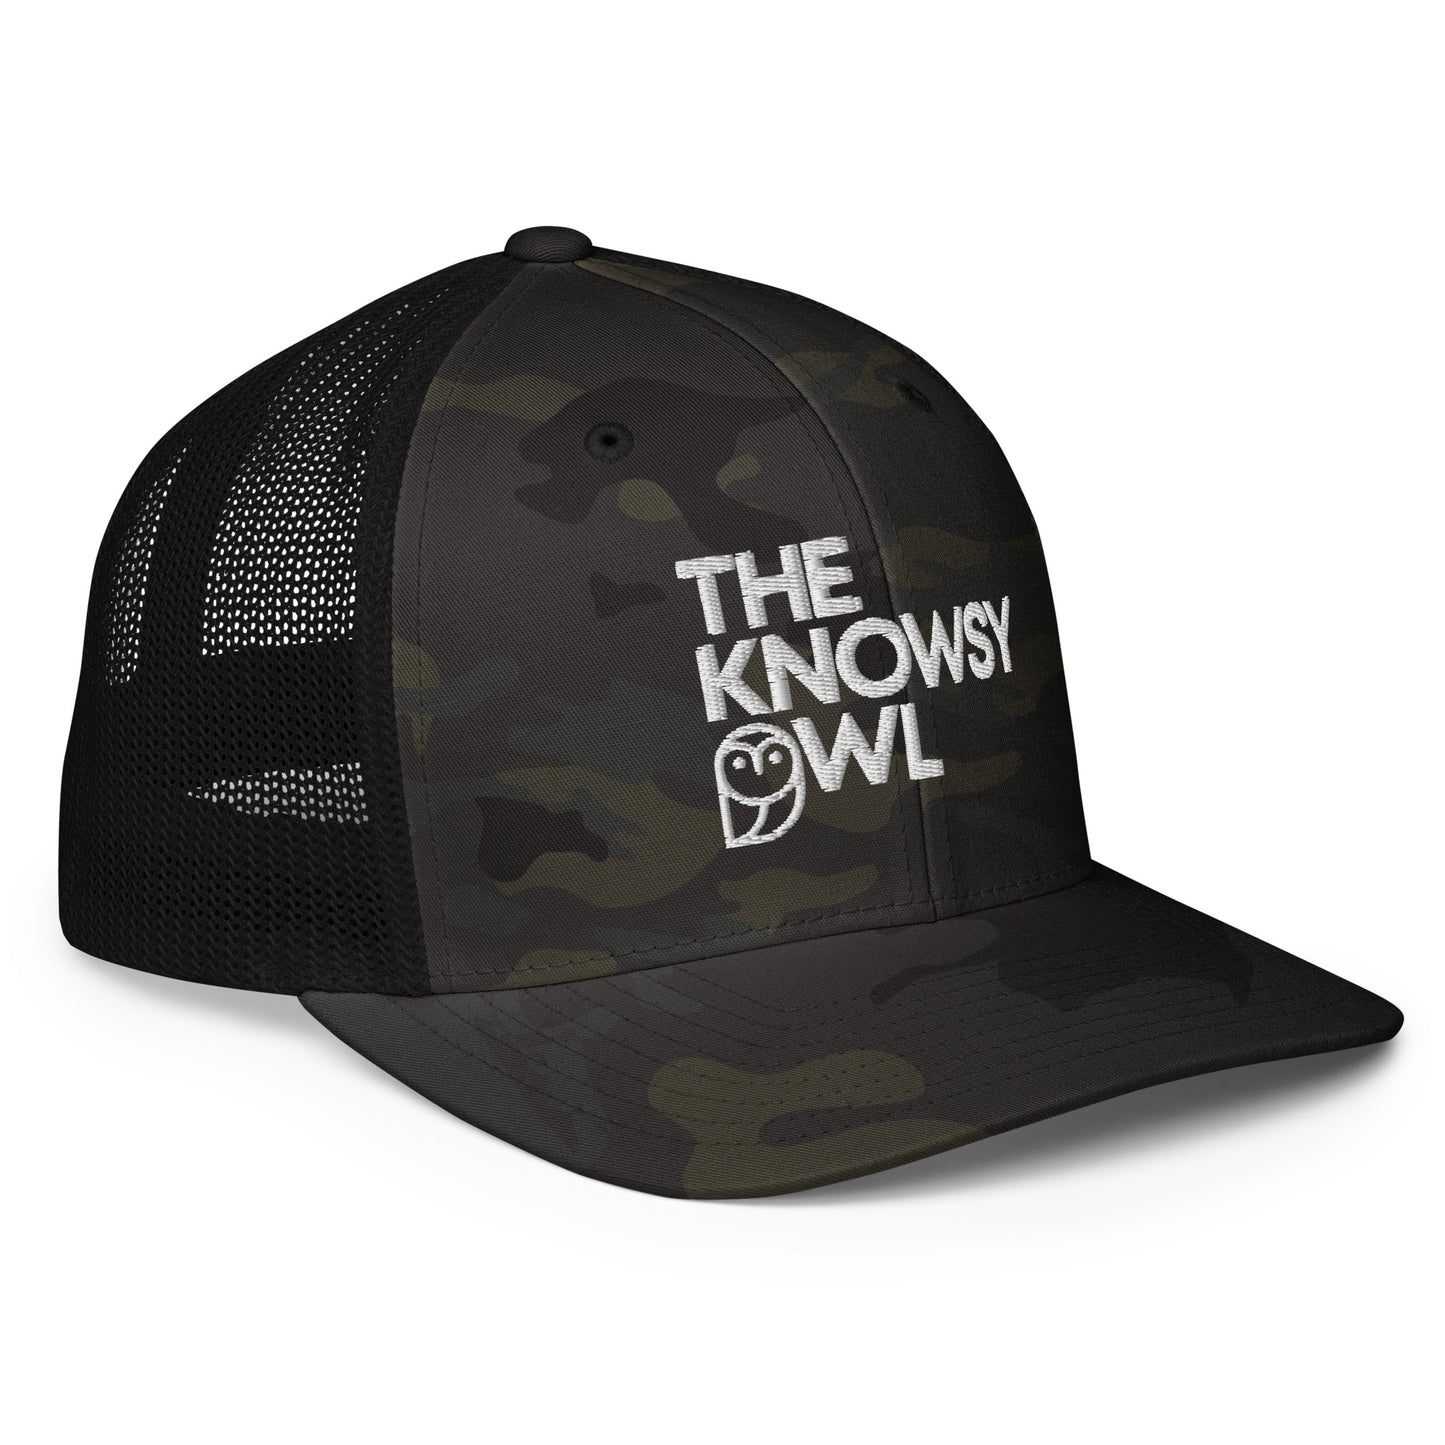 The Knowsy Owl Closed-Back Trucker Hat